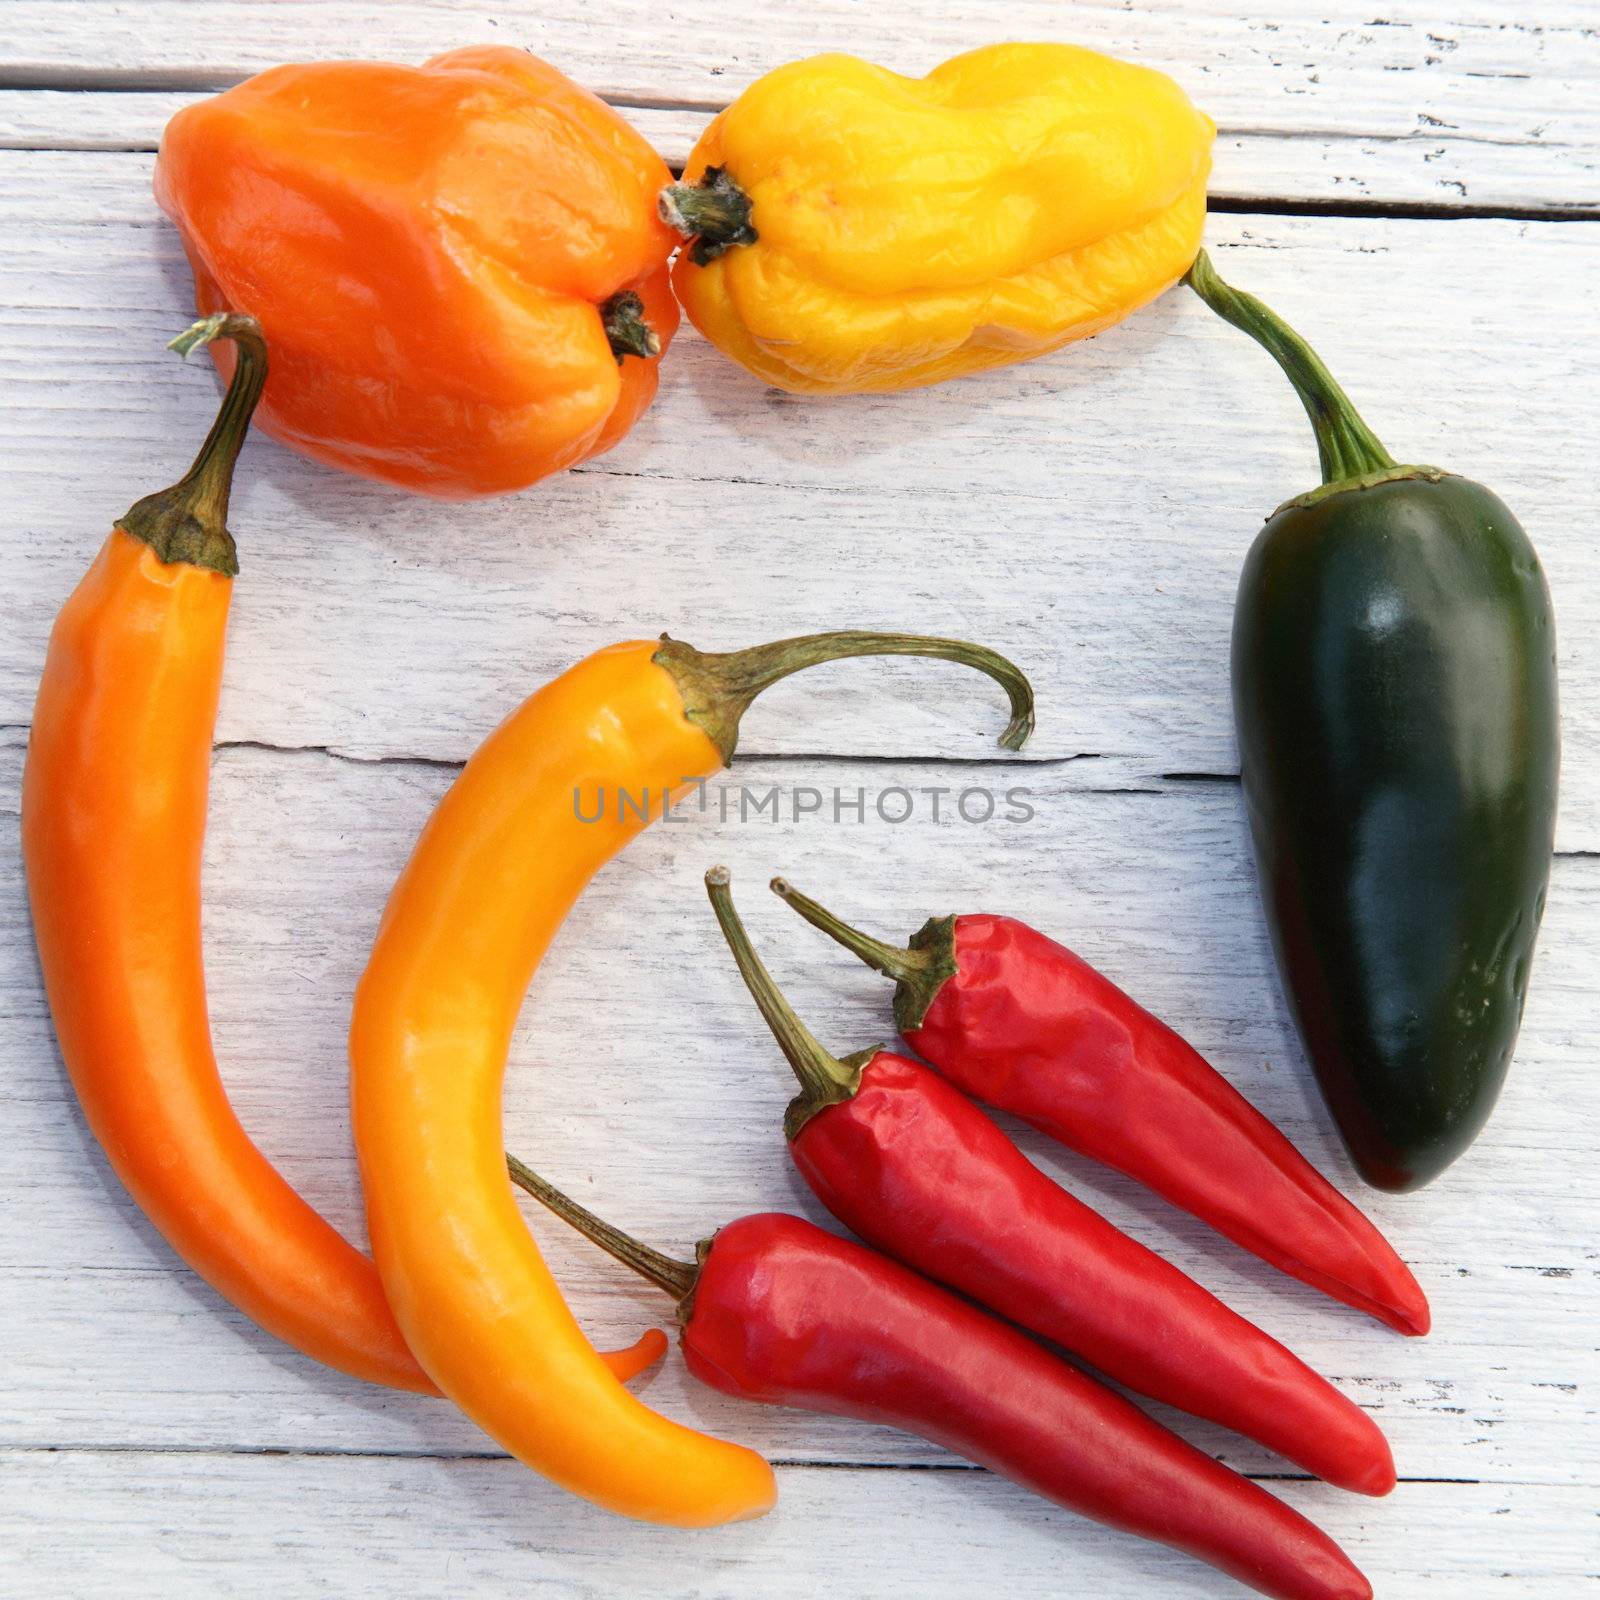 Assorted colourful peppers by Farina6000